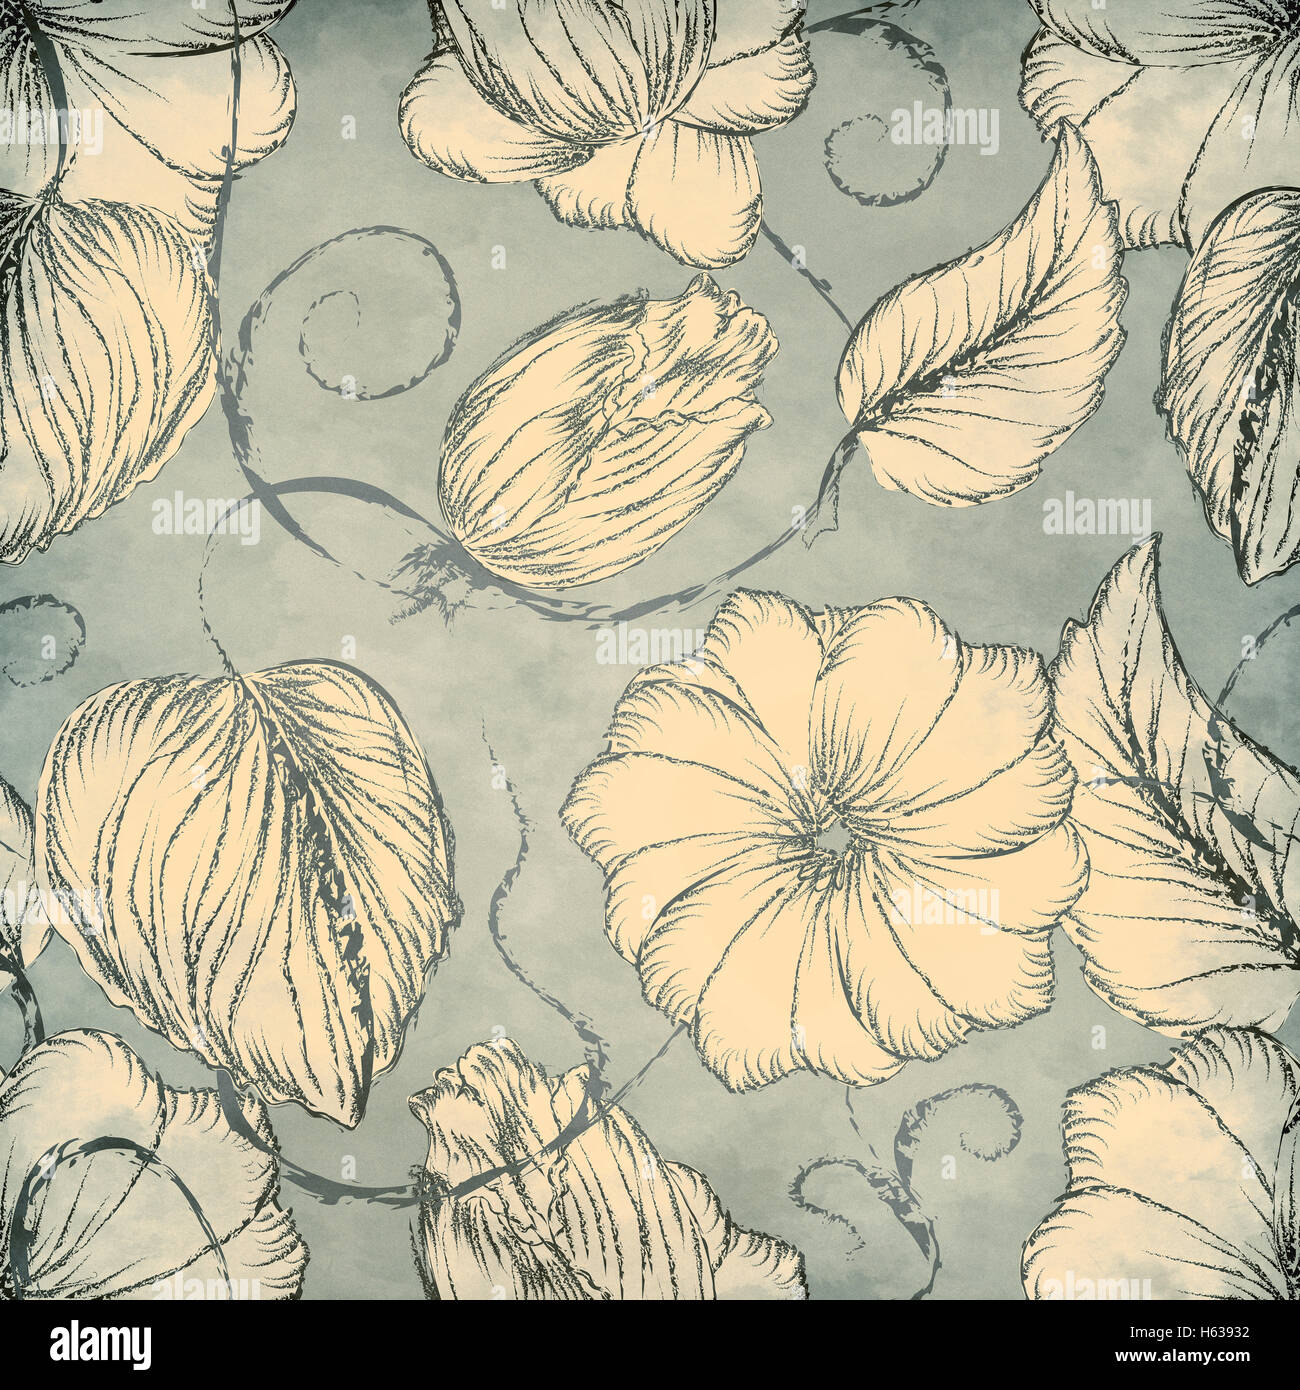 Hand drawn pattern with flowers and leaves Stock Photo